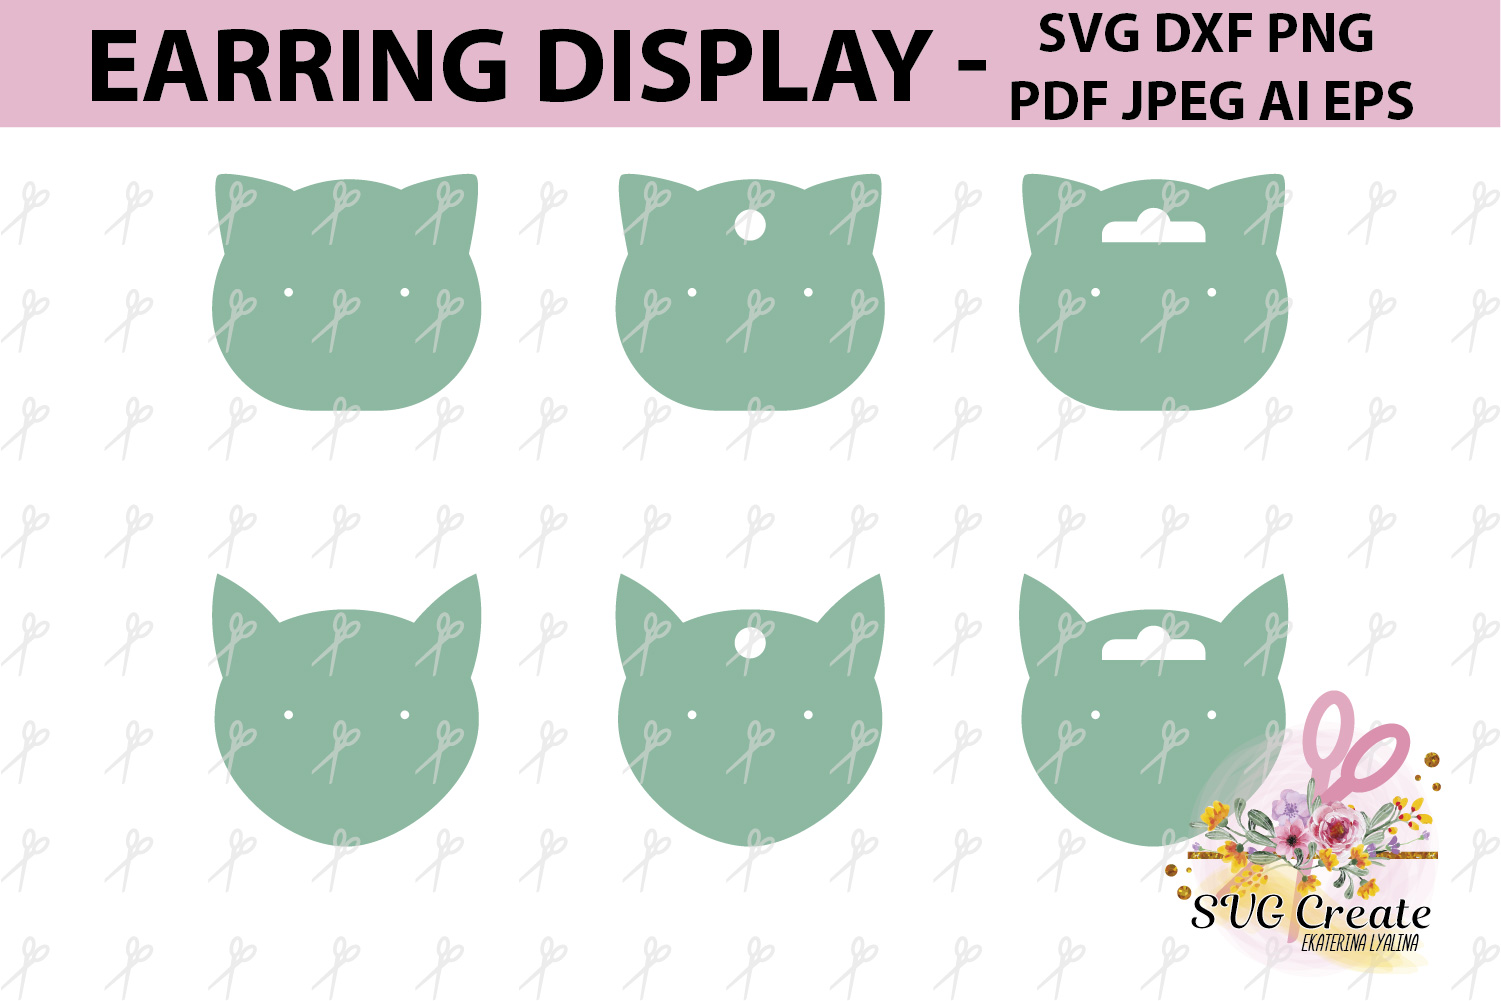 Earring cards svg, earring display svg, display template